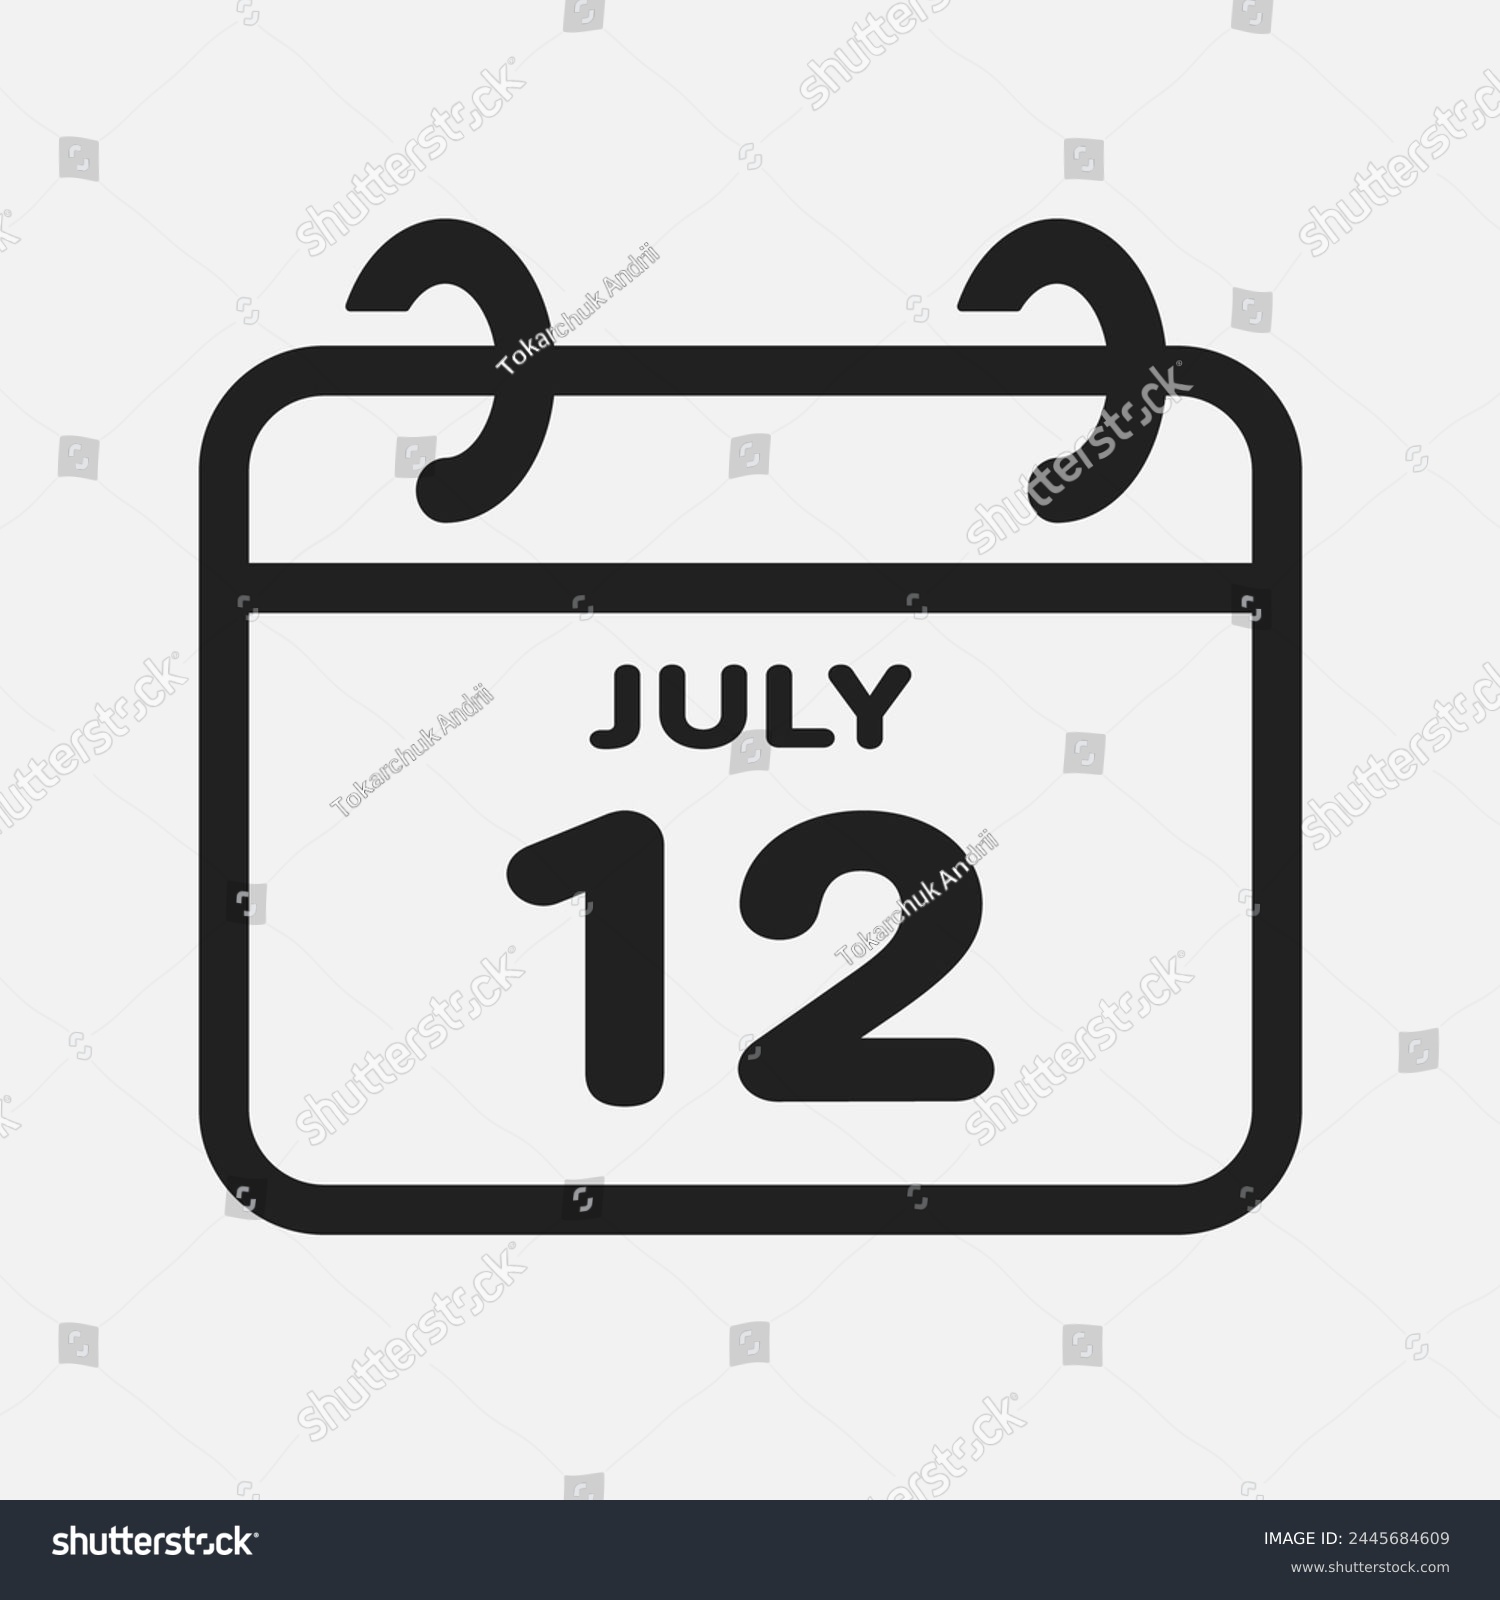 SVG of Vector icon page calendar day of month - 12 July. 12th day of month - Sunday, Monday, Tuesday, Wednesday, Thursday, Friday, Saturday. Anniversary, reminder, plan, to-do list. Calender on the wall svg